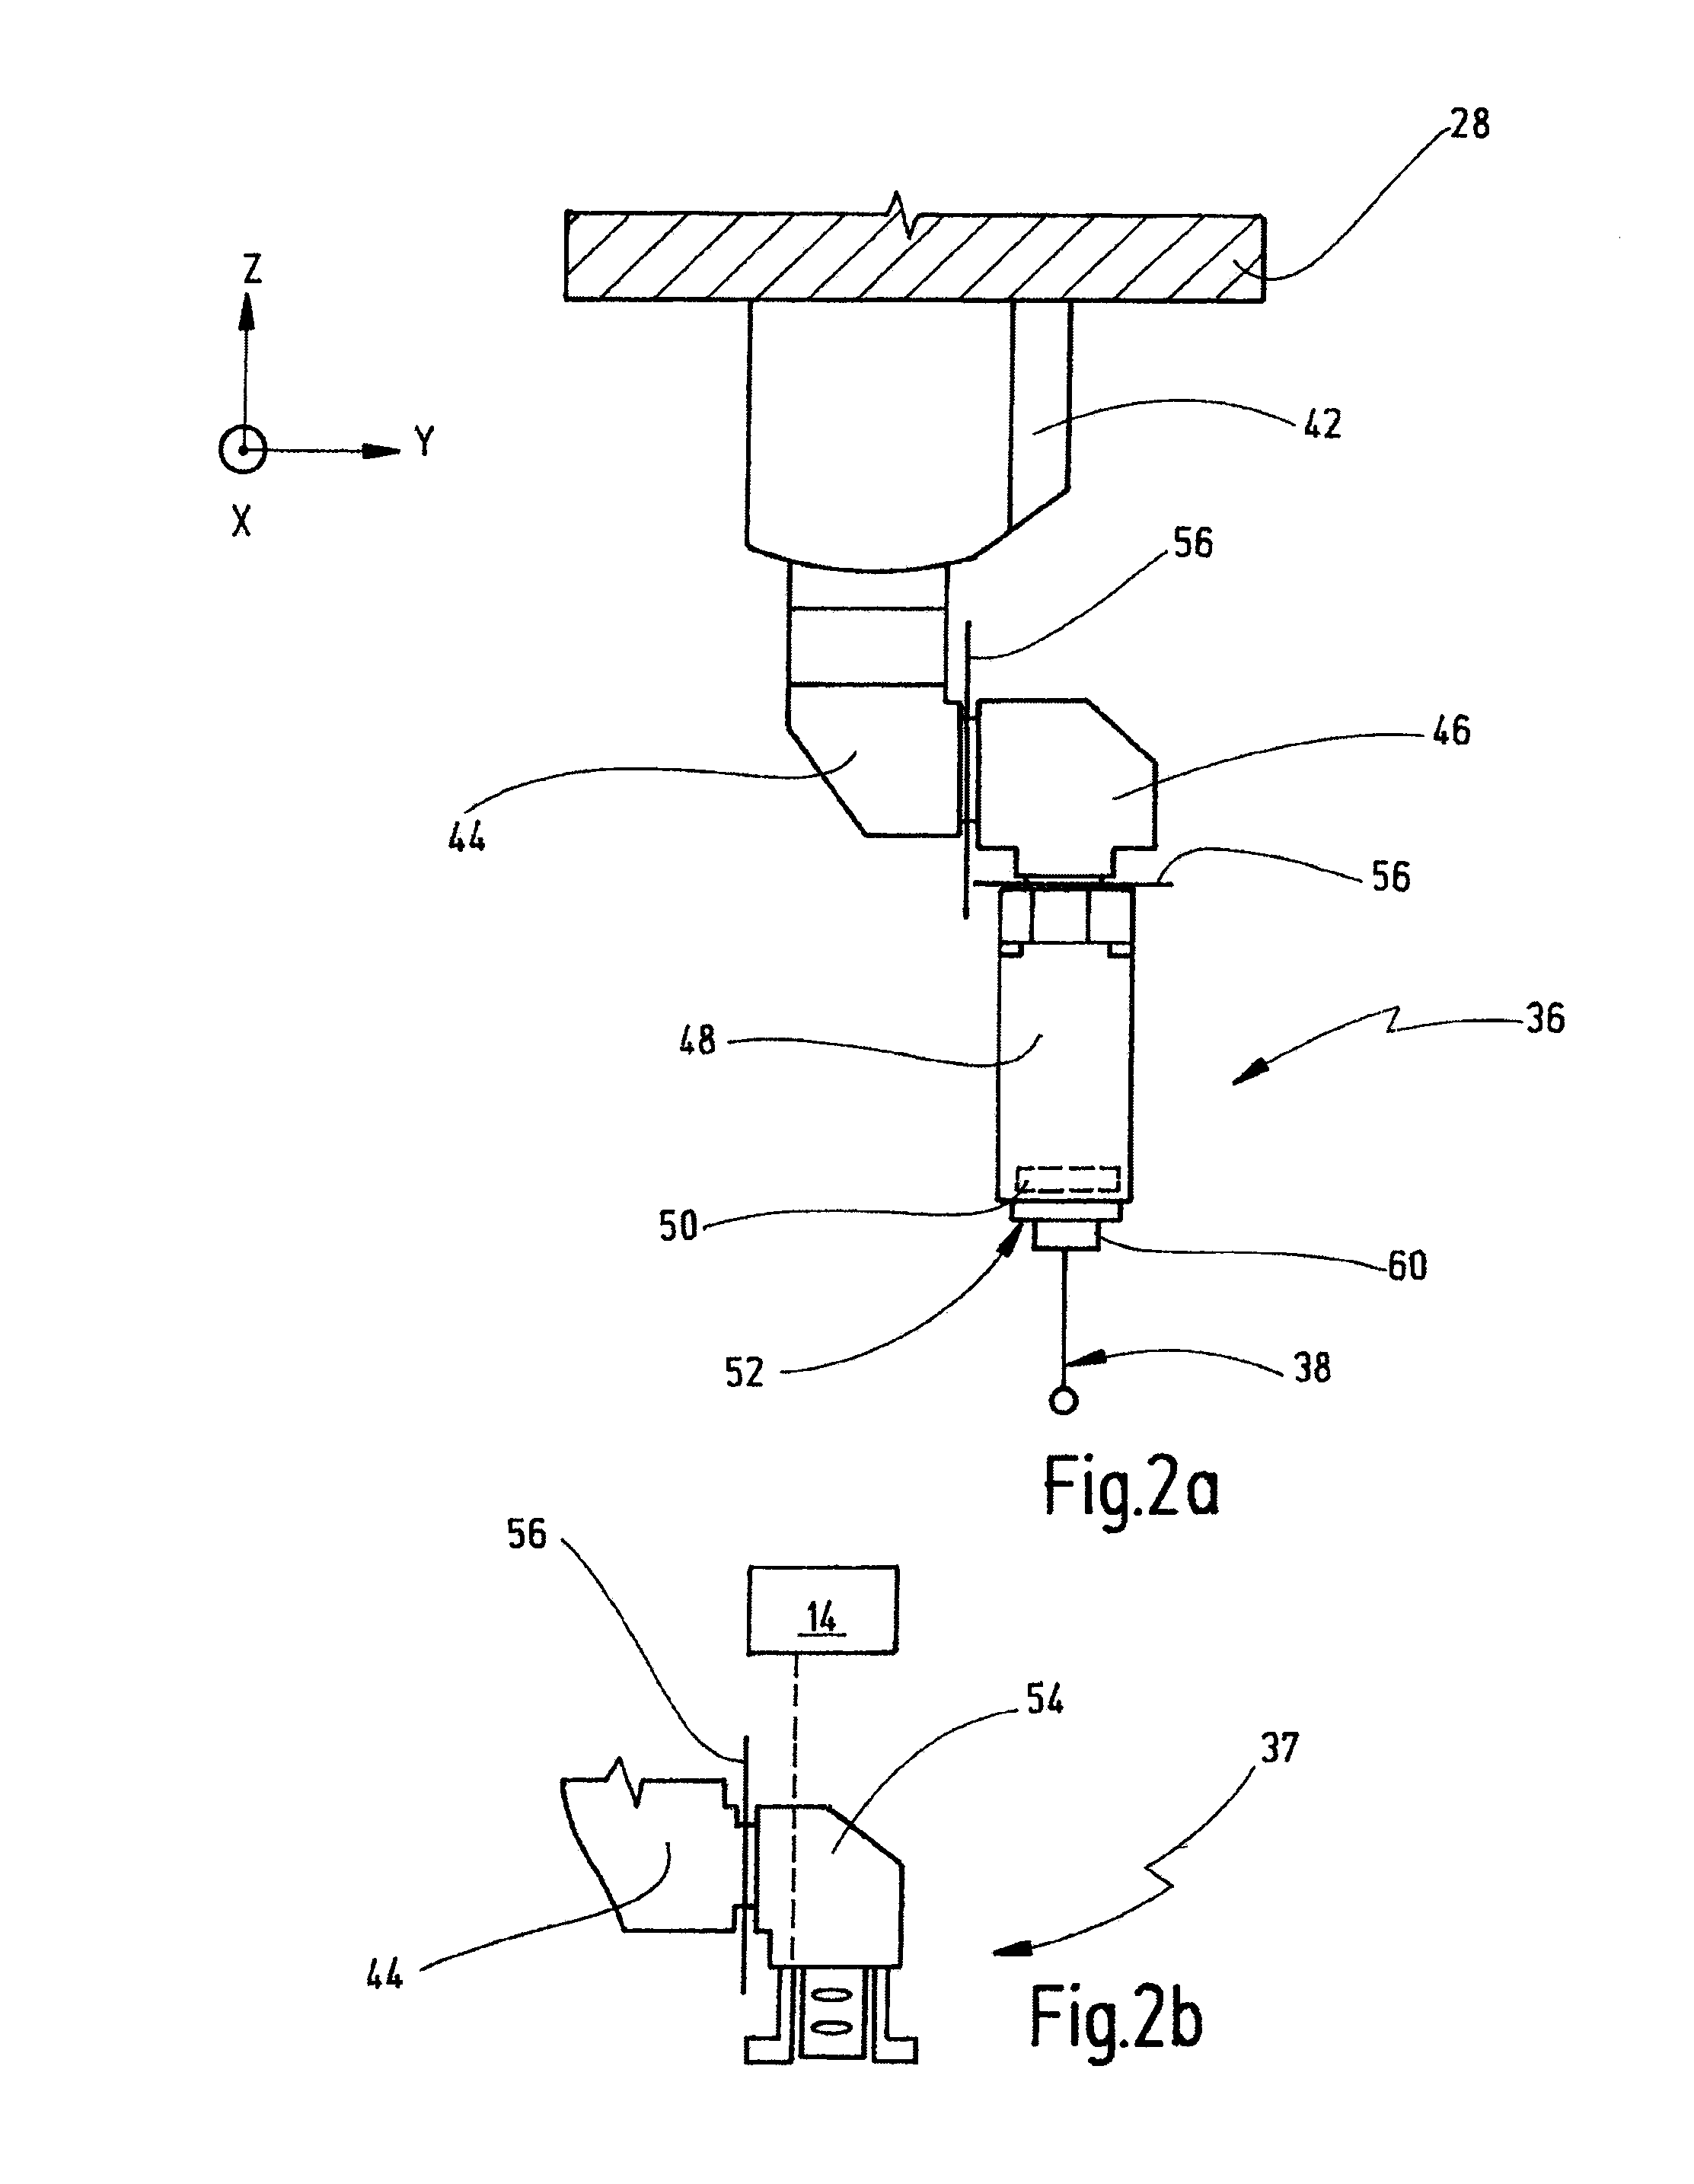 Method for coupling two system components of a measuring device, in particular a coordinate measuring device